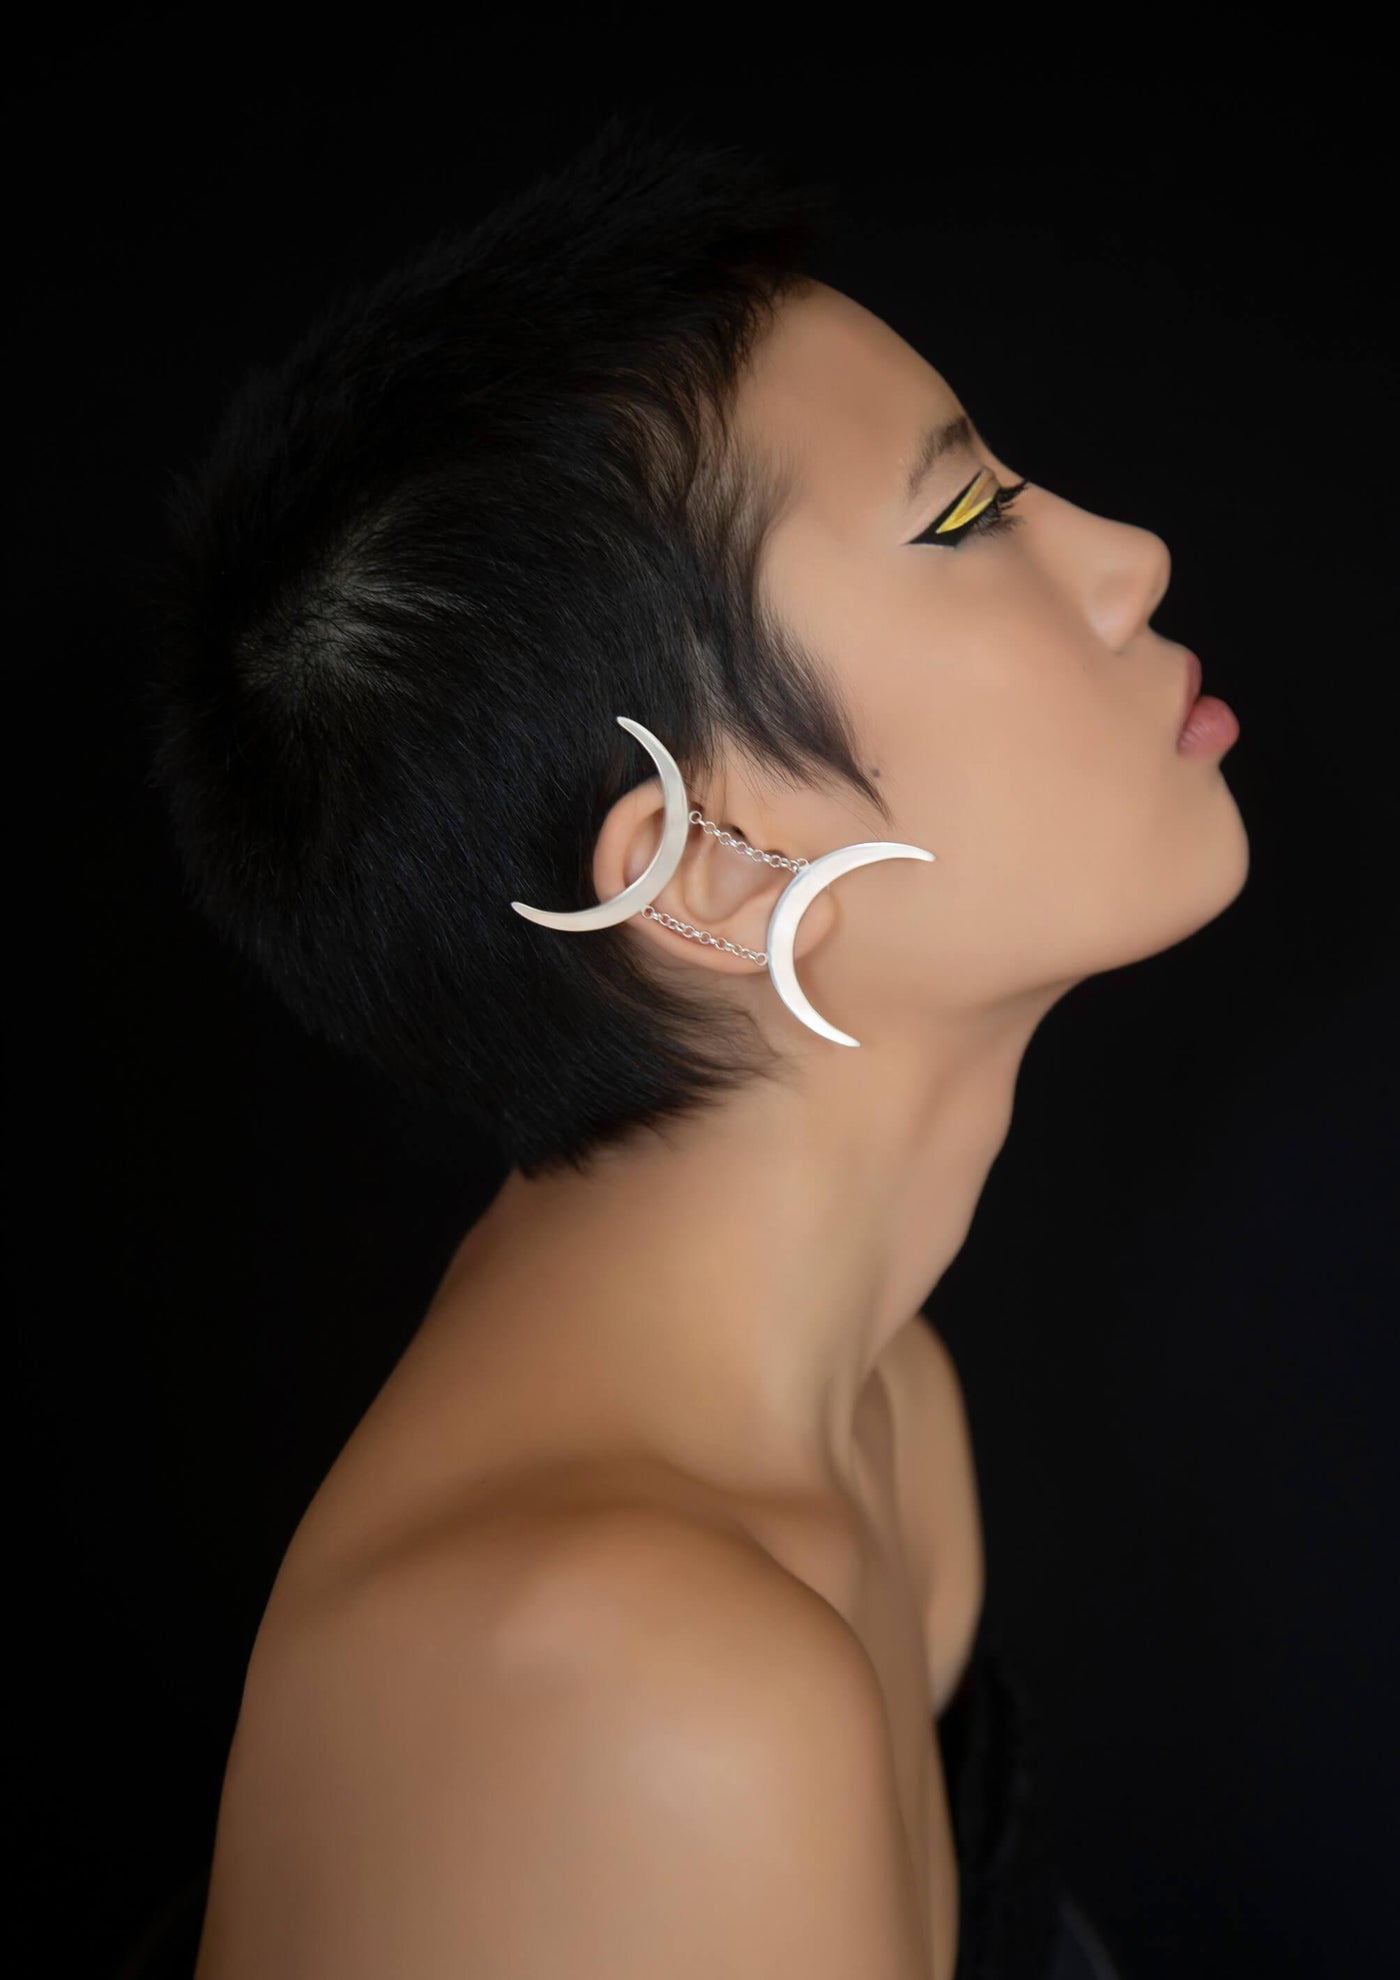 Unique Avant-garde statement Gemini Ear Cuffs - Ethically handmade of Sterling Silver 925. Contemporary unique design of limited edition by Mystic J for your luxury look.